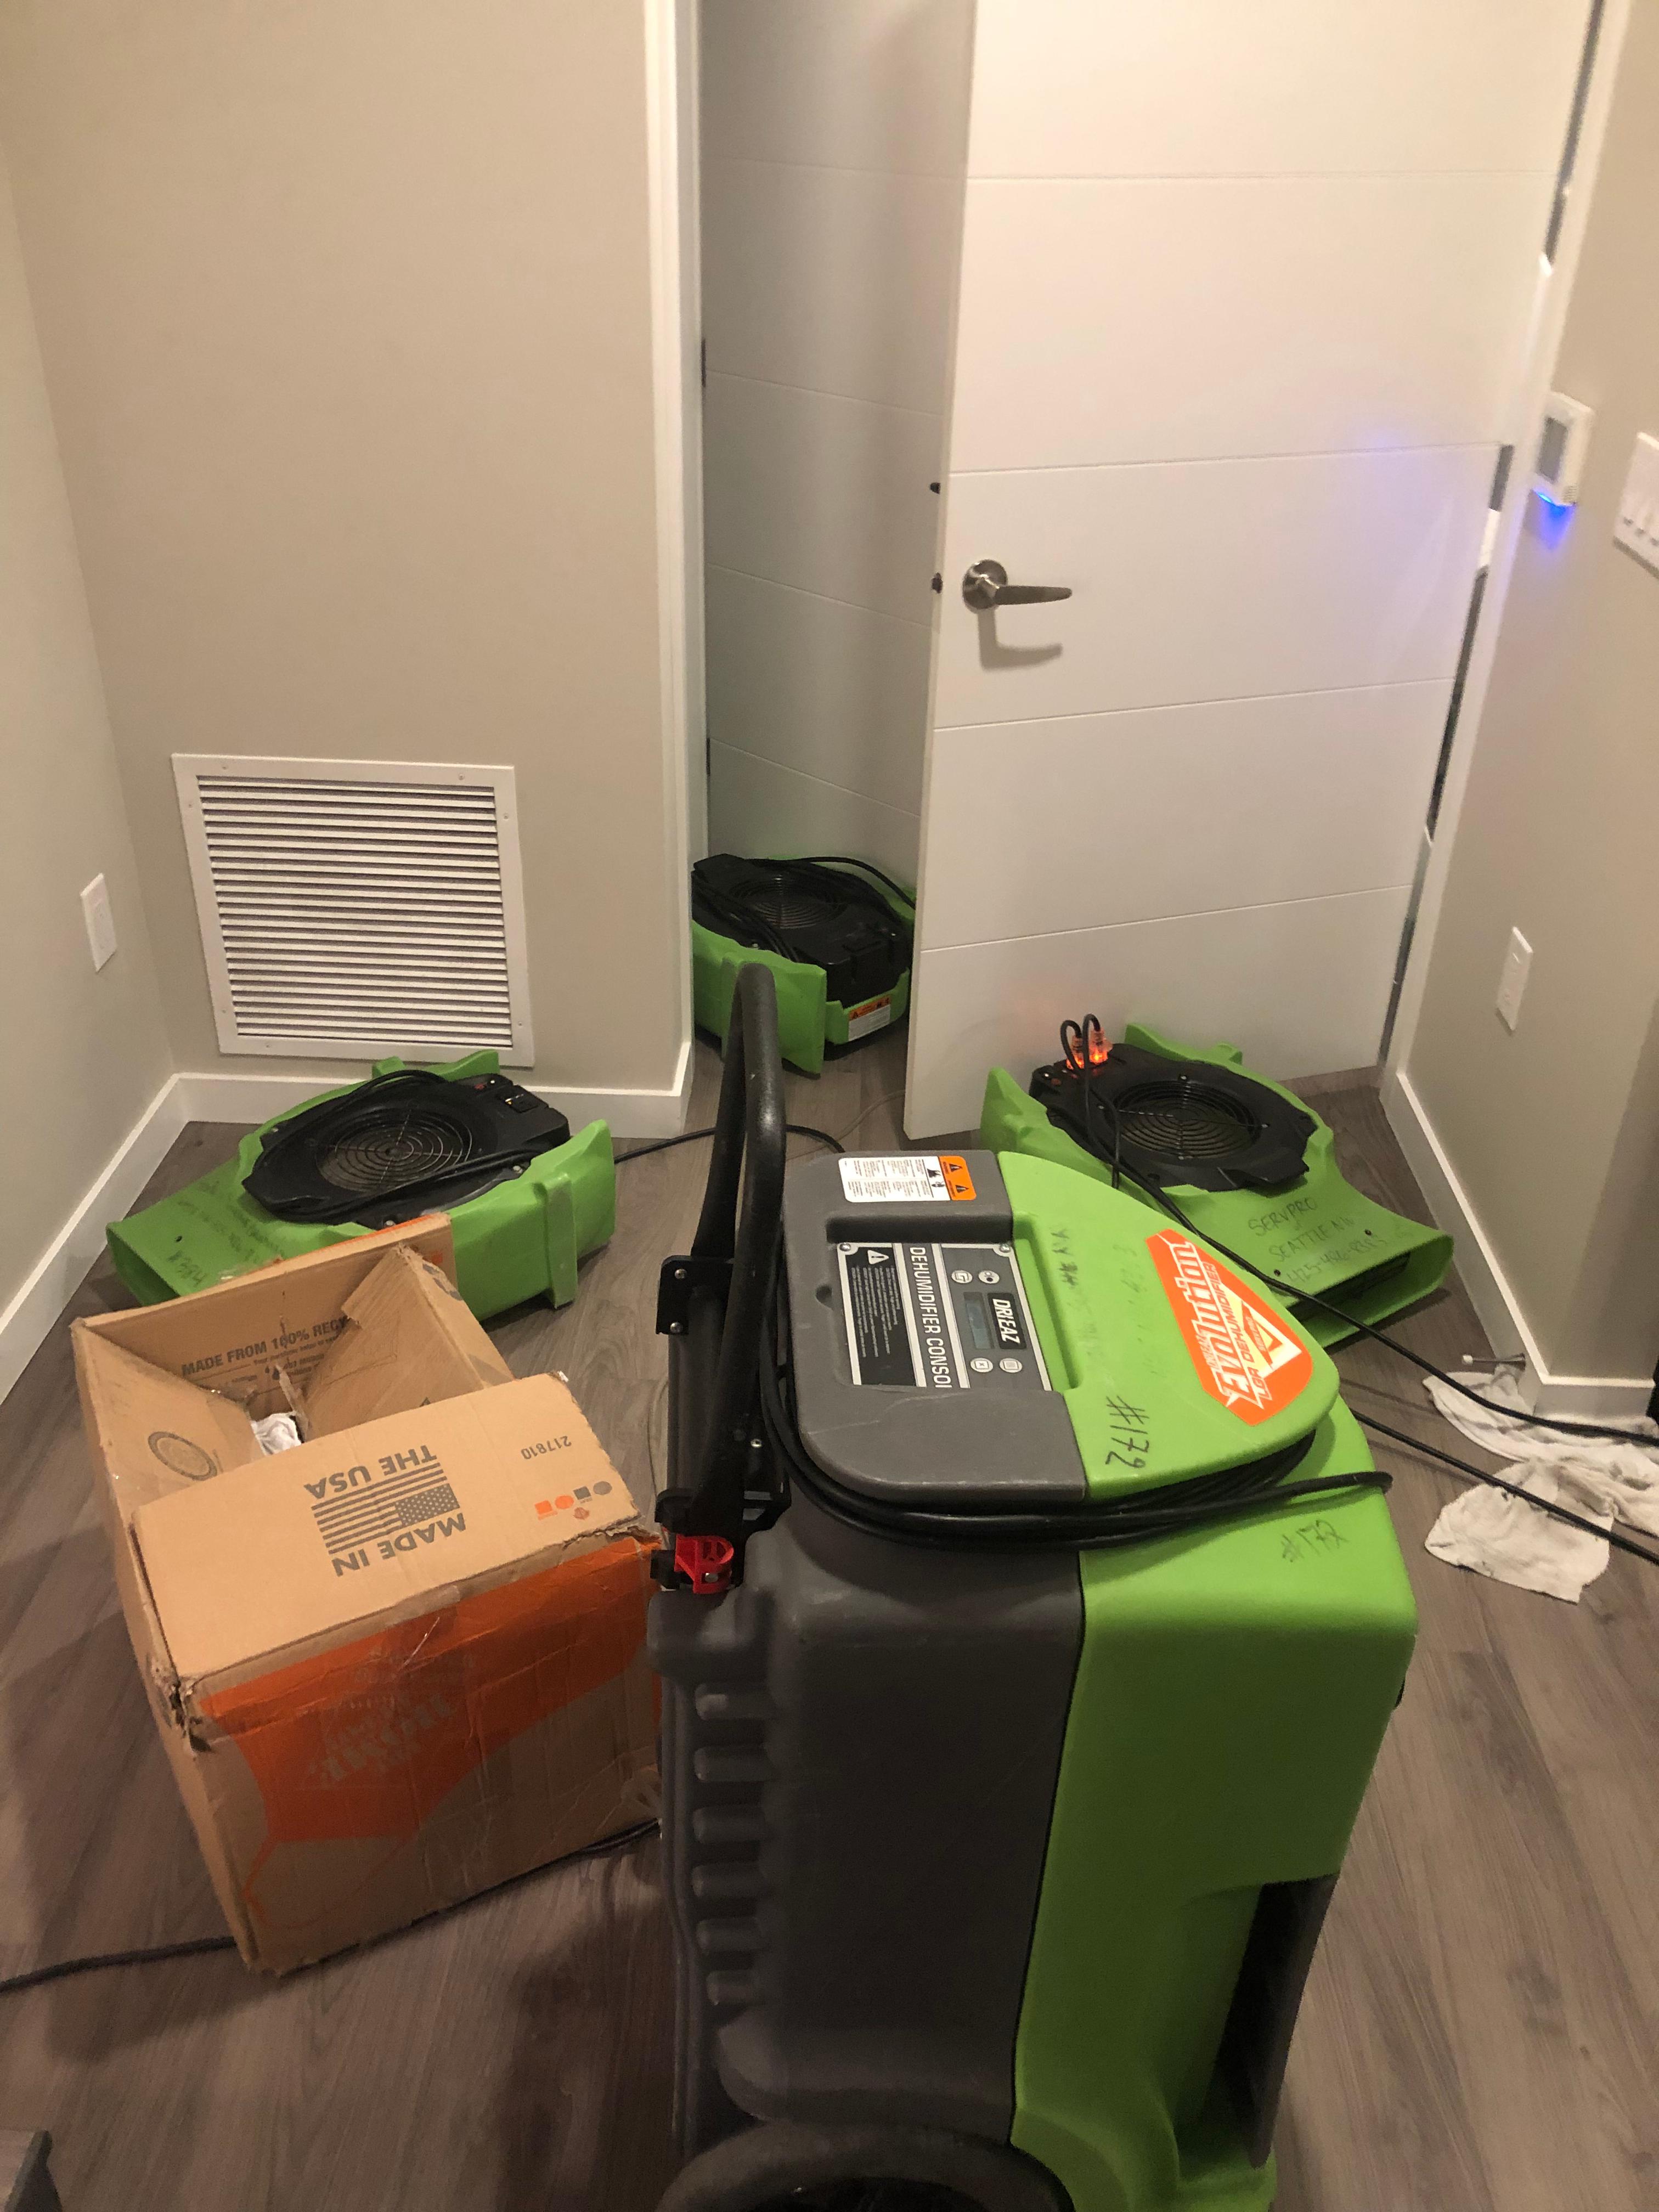 Call SERVPRO of Shoreline/Woodinville when noticing the first signs of water damage!